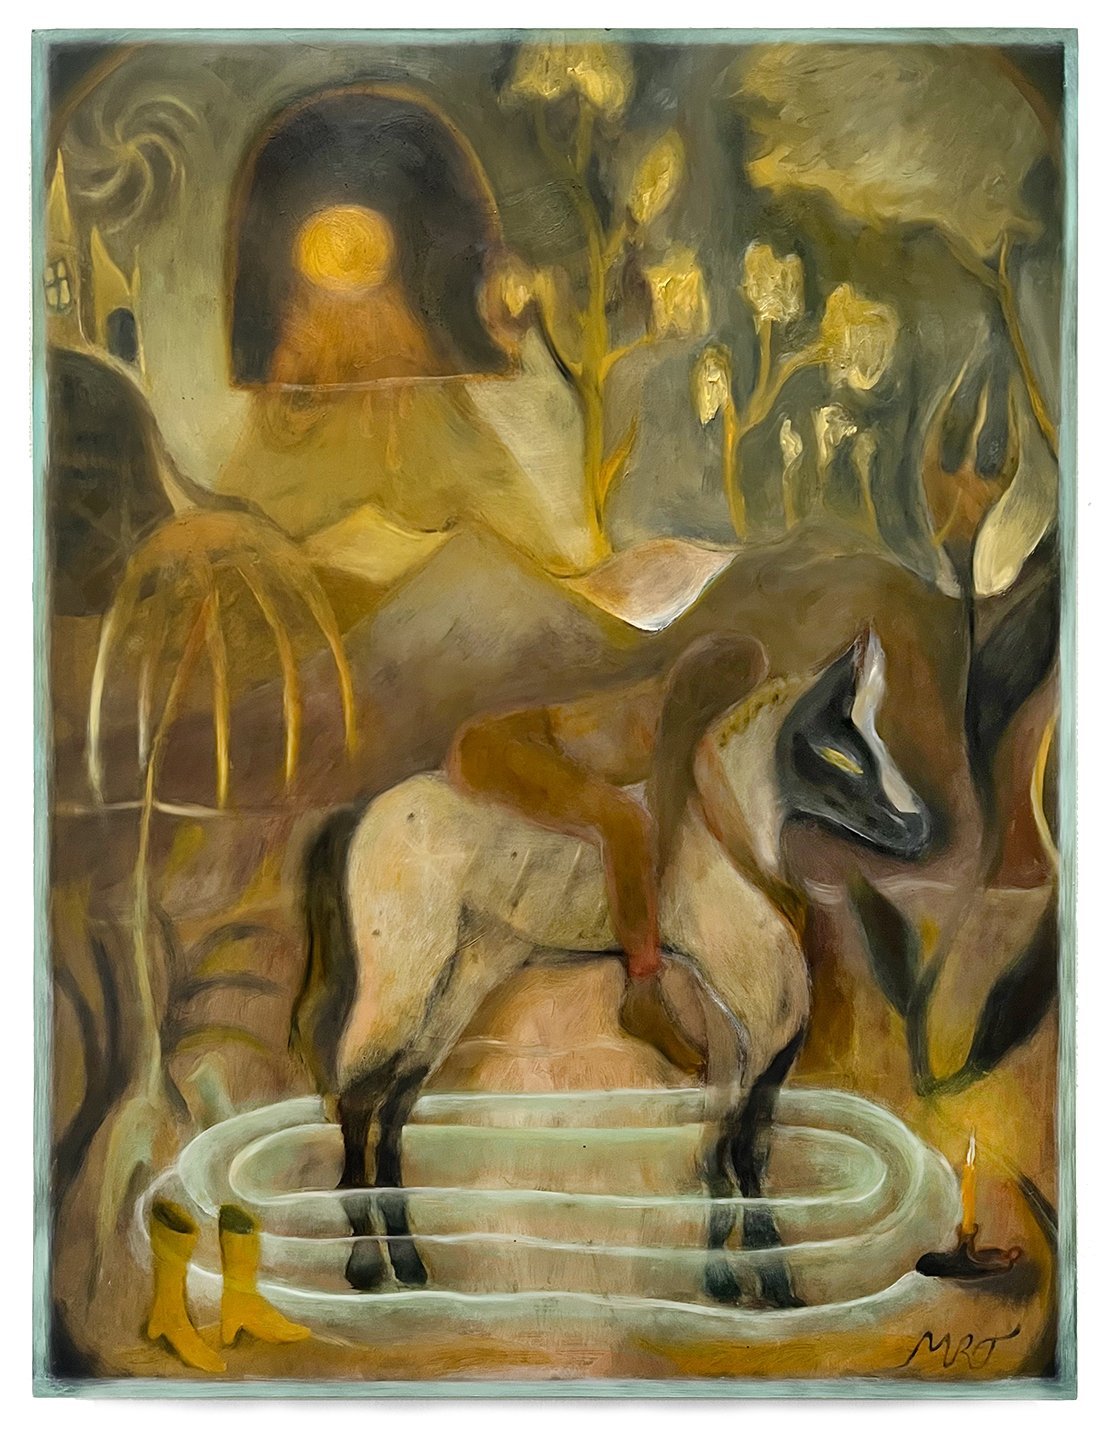 Margaret Thompson Neverland, 2022 Oil and wax on panel 24 x 18 inches